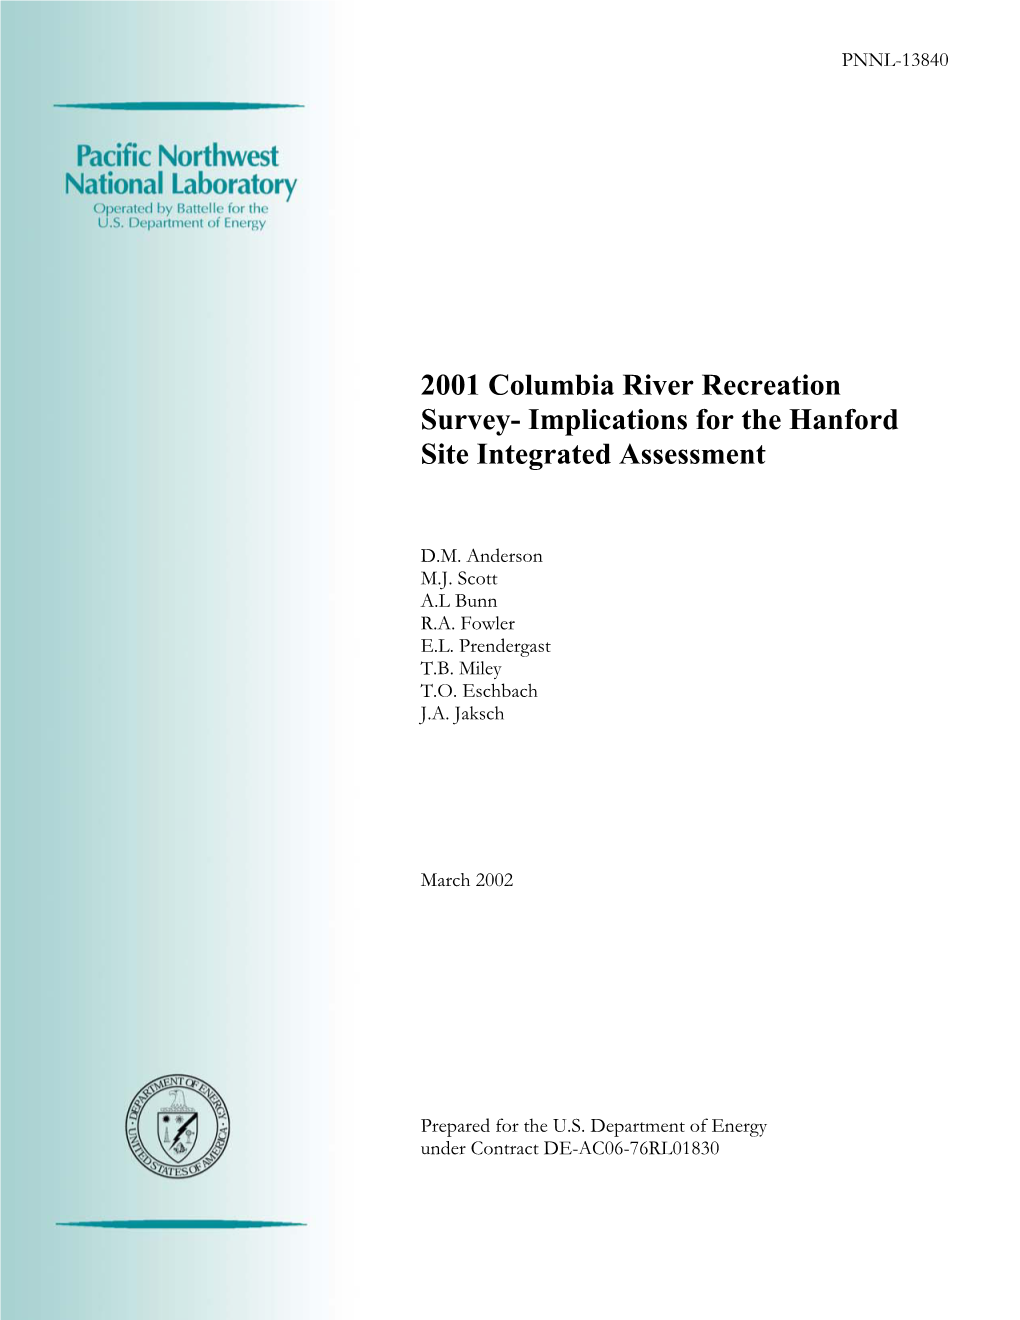 2001 Columbia River Recreation Survey- Implications for the Hanford Site Integrated Assessment